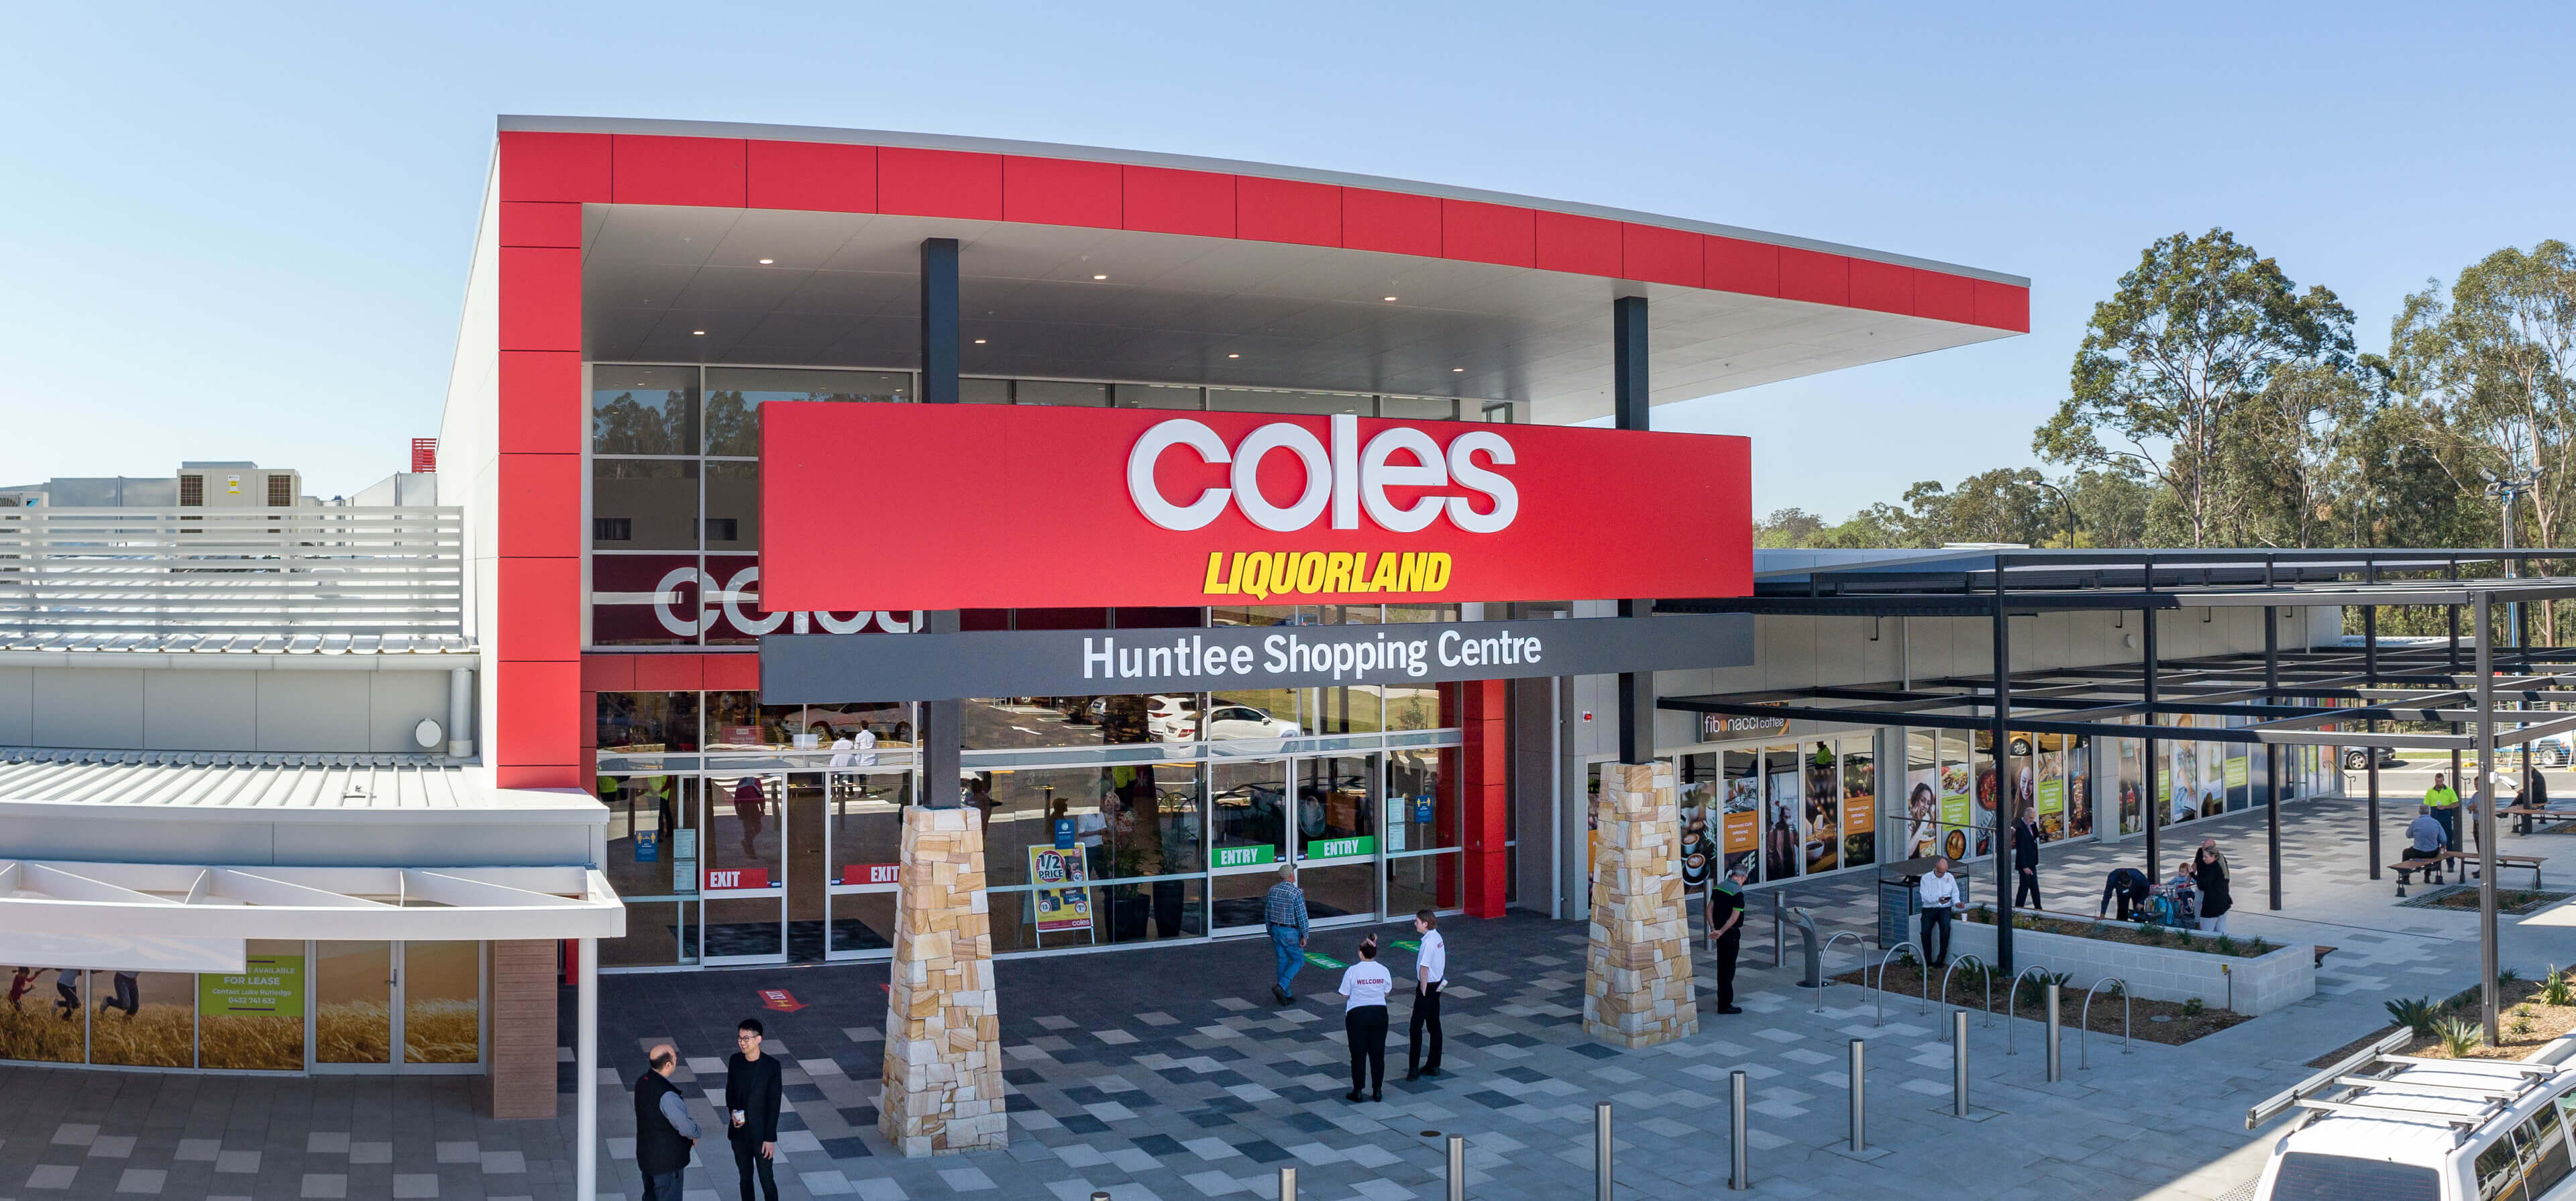 2 3311m2 new supermarket at coles huntlee taylor construction retail